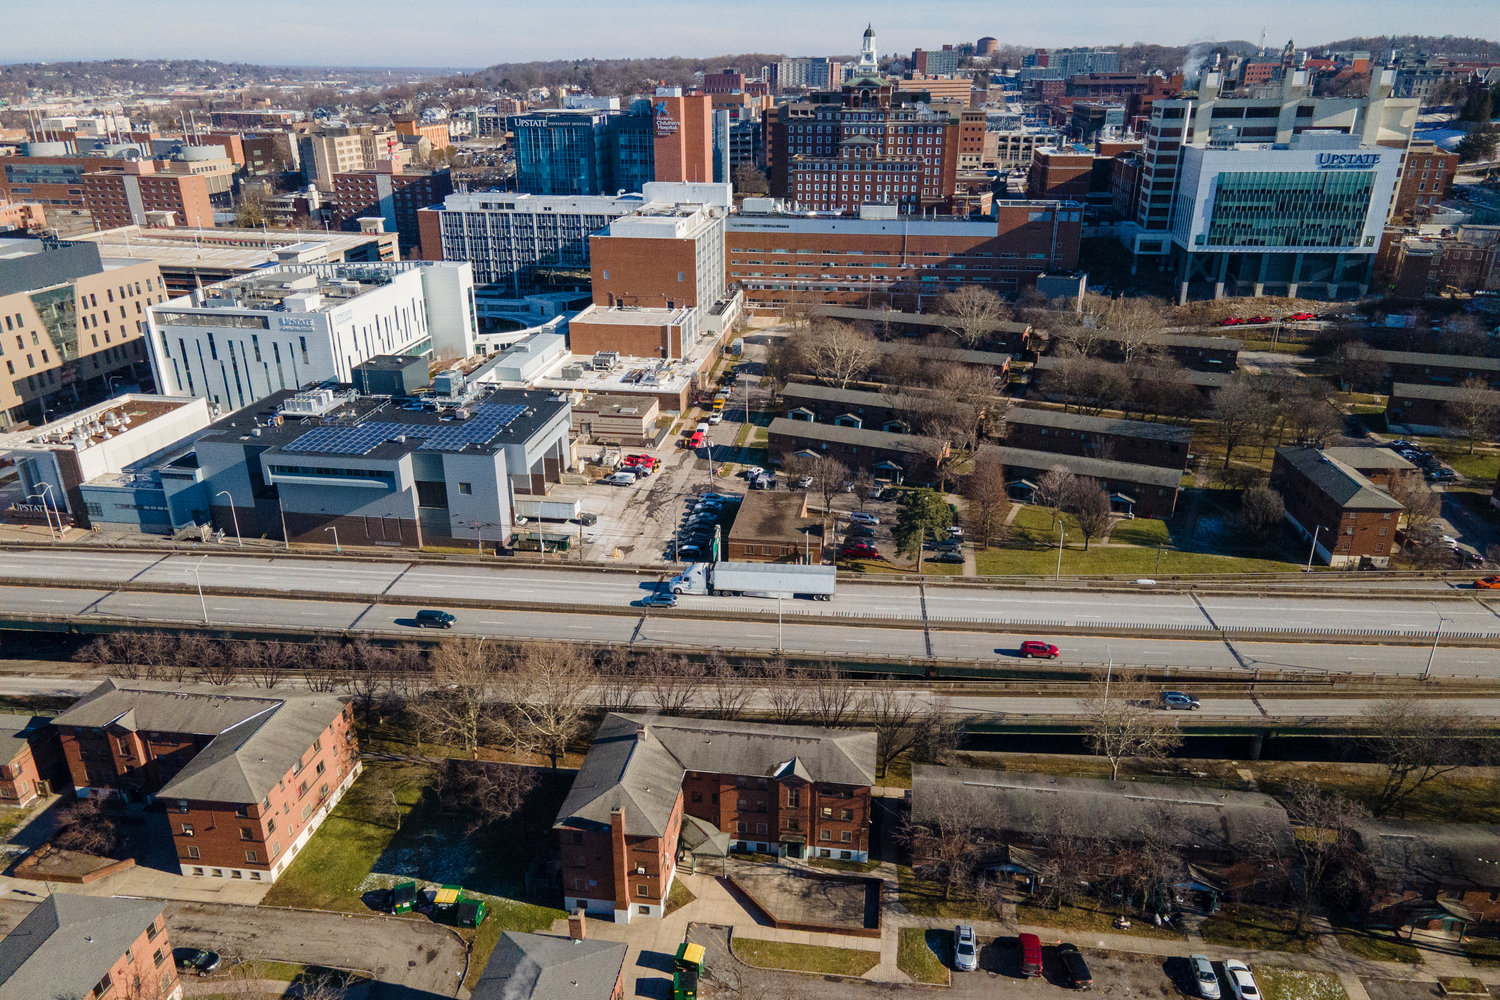 Interstate 81 passes through downtown Syracuse, New York, on Monday, Jan. 16, 2023. On the west side of the roadway are the Pioneer Homes public housing projects. Hospitals, hotels and other buildings are visible on the east side. (AP Photo/Ted Shaffrey)